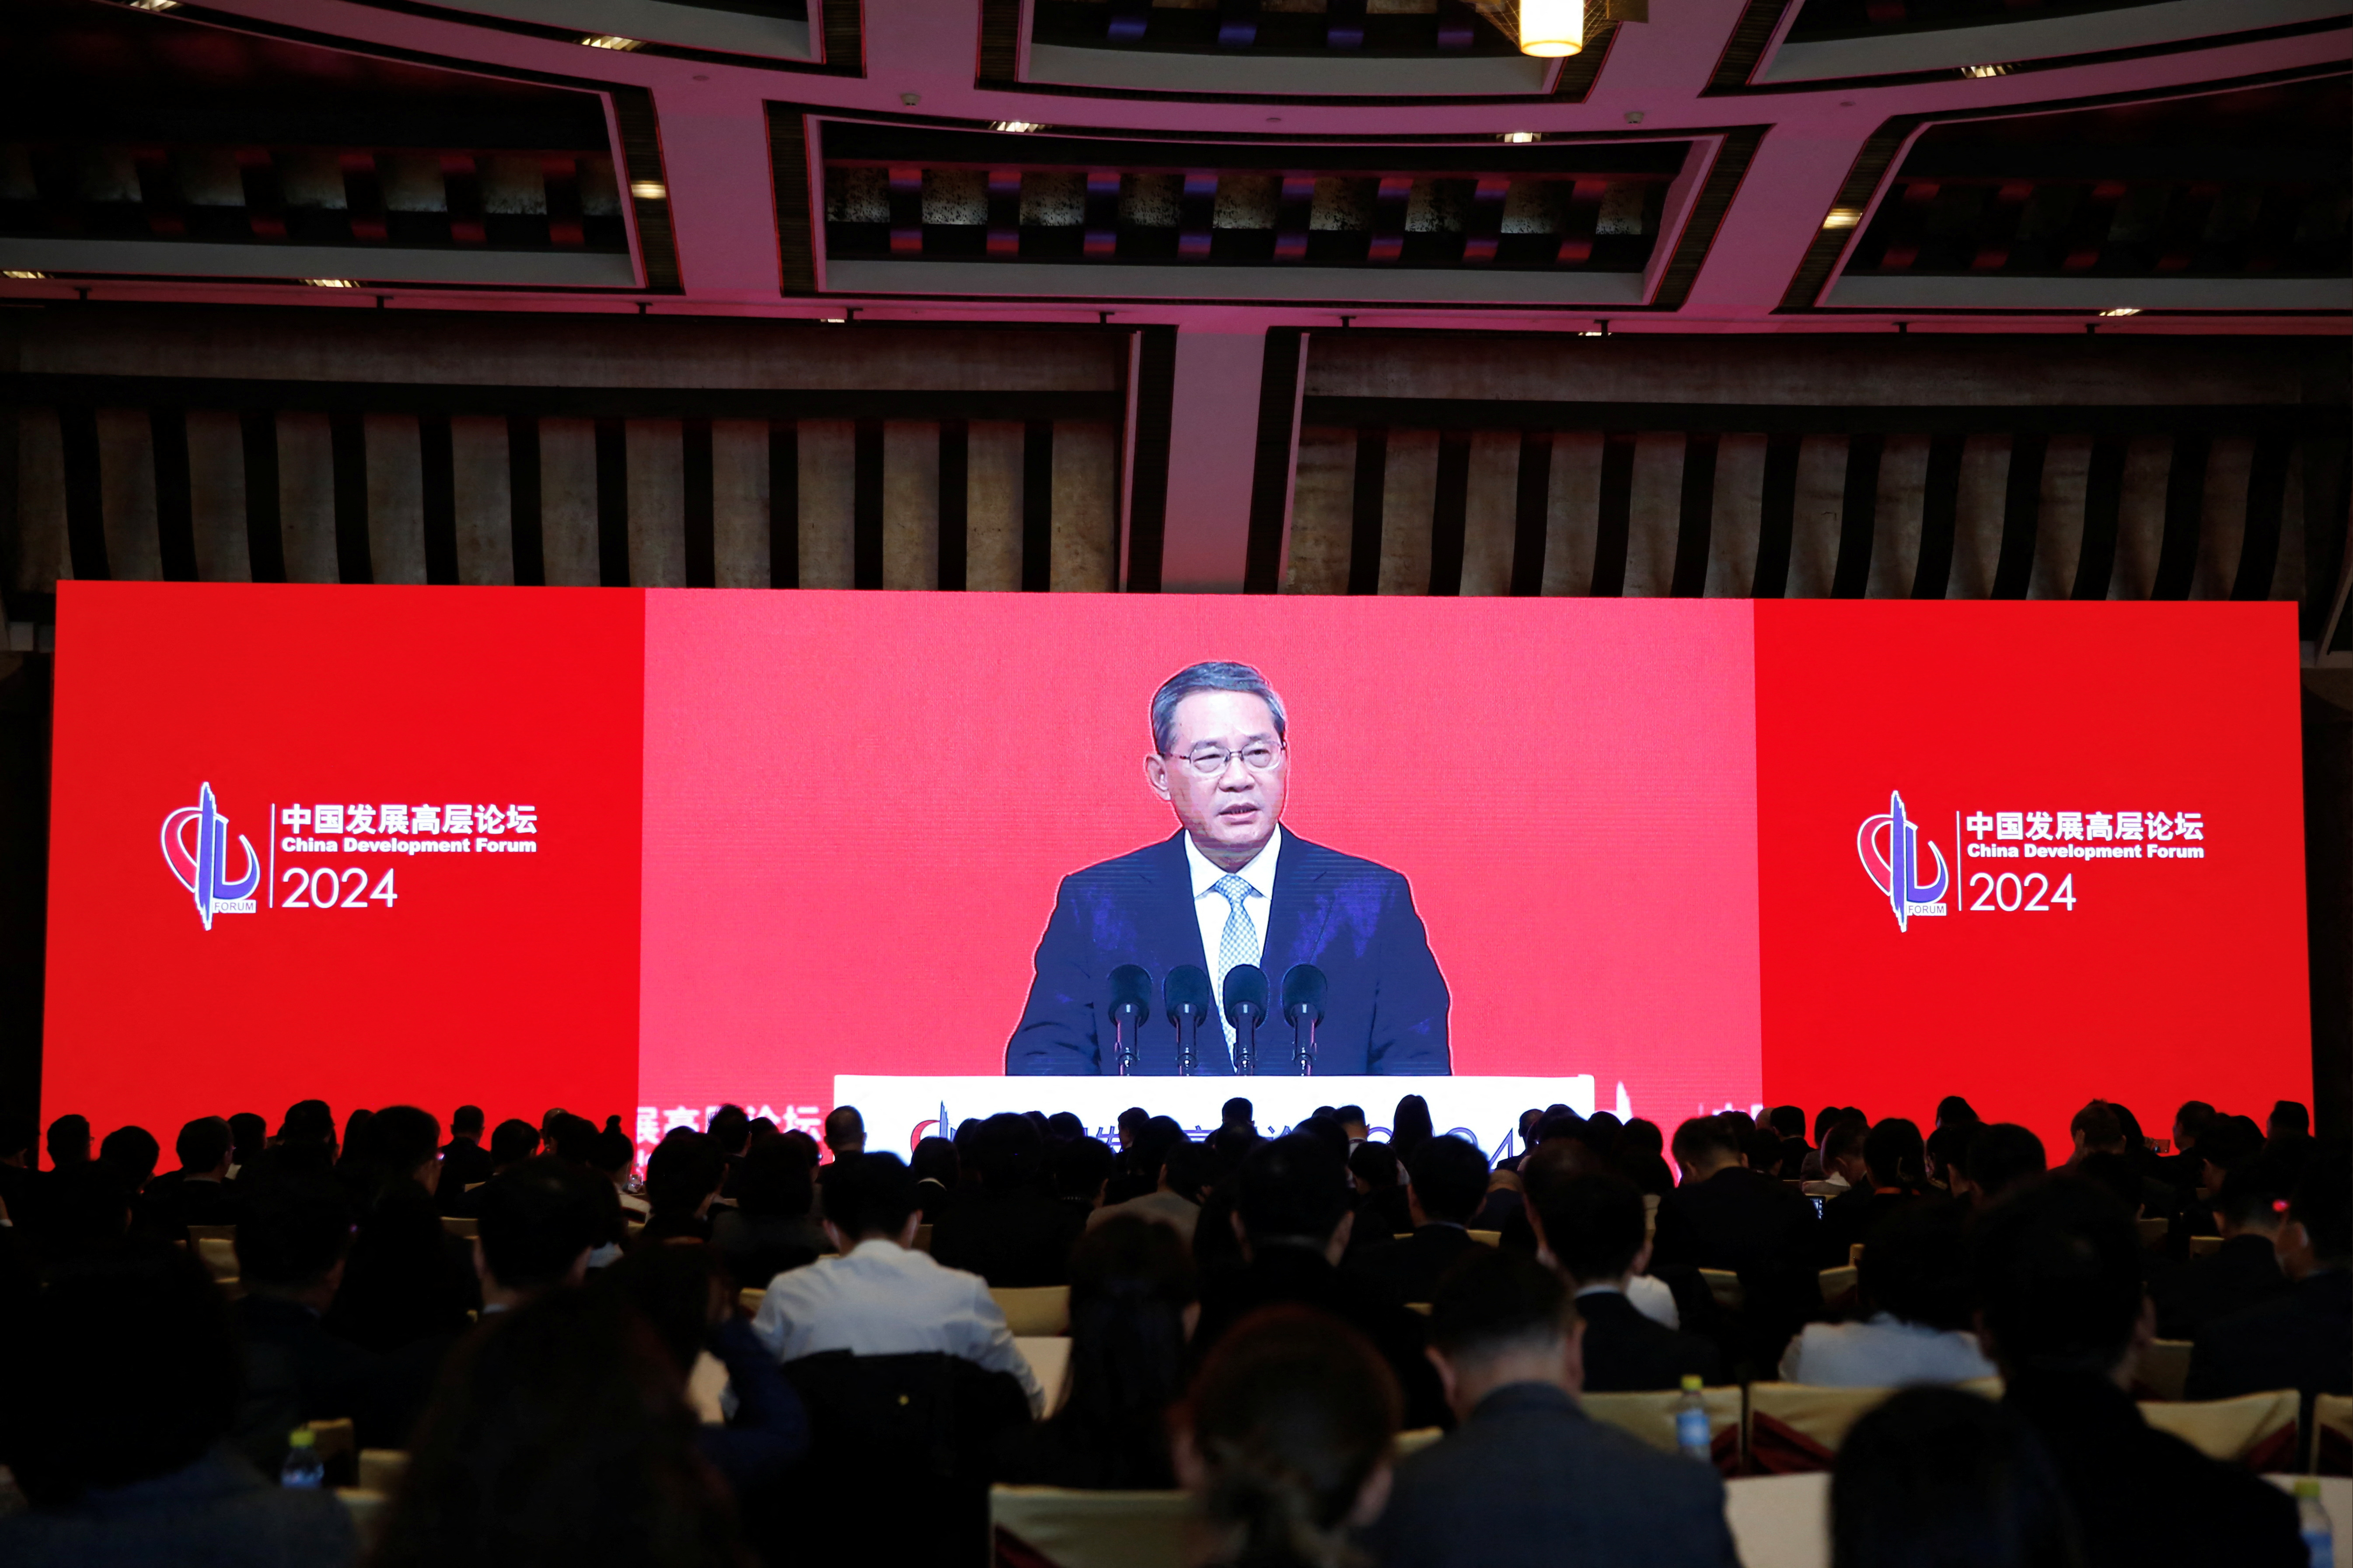 Screen shows Chinese Premier Li Qiang delivering a speech at the opening ceremony of China Development Forum (CDF) 2024, in Beijing